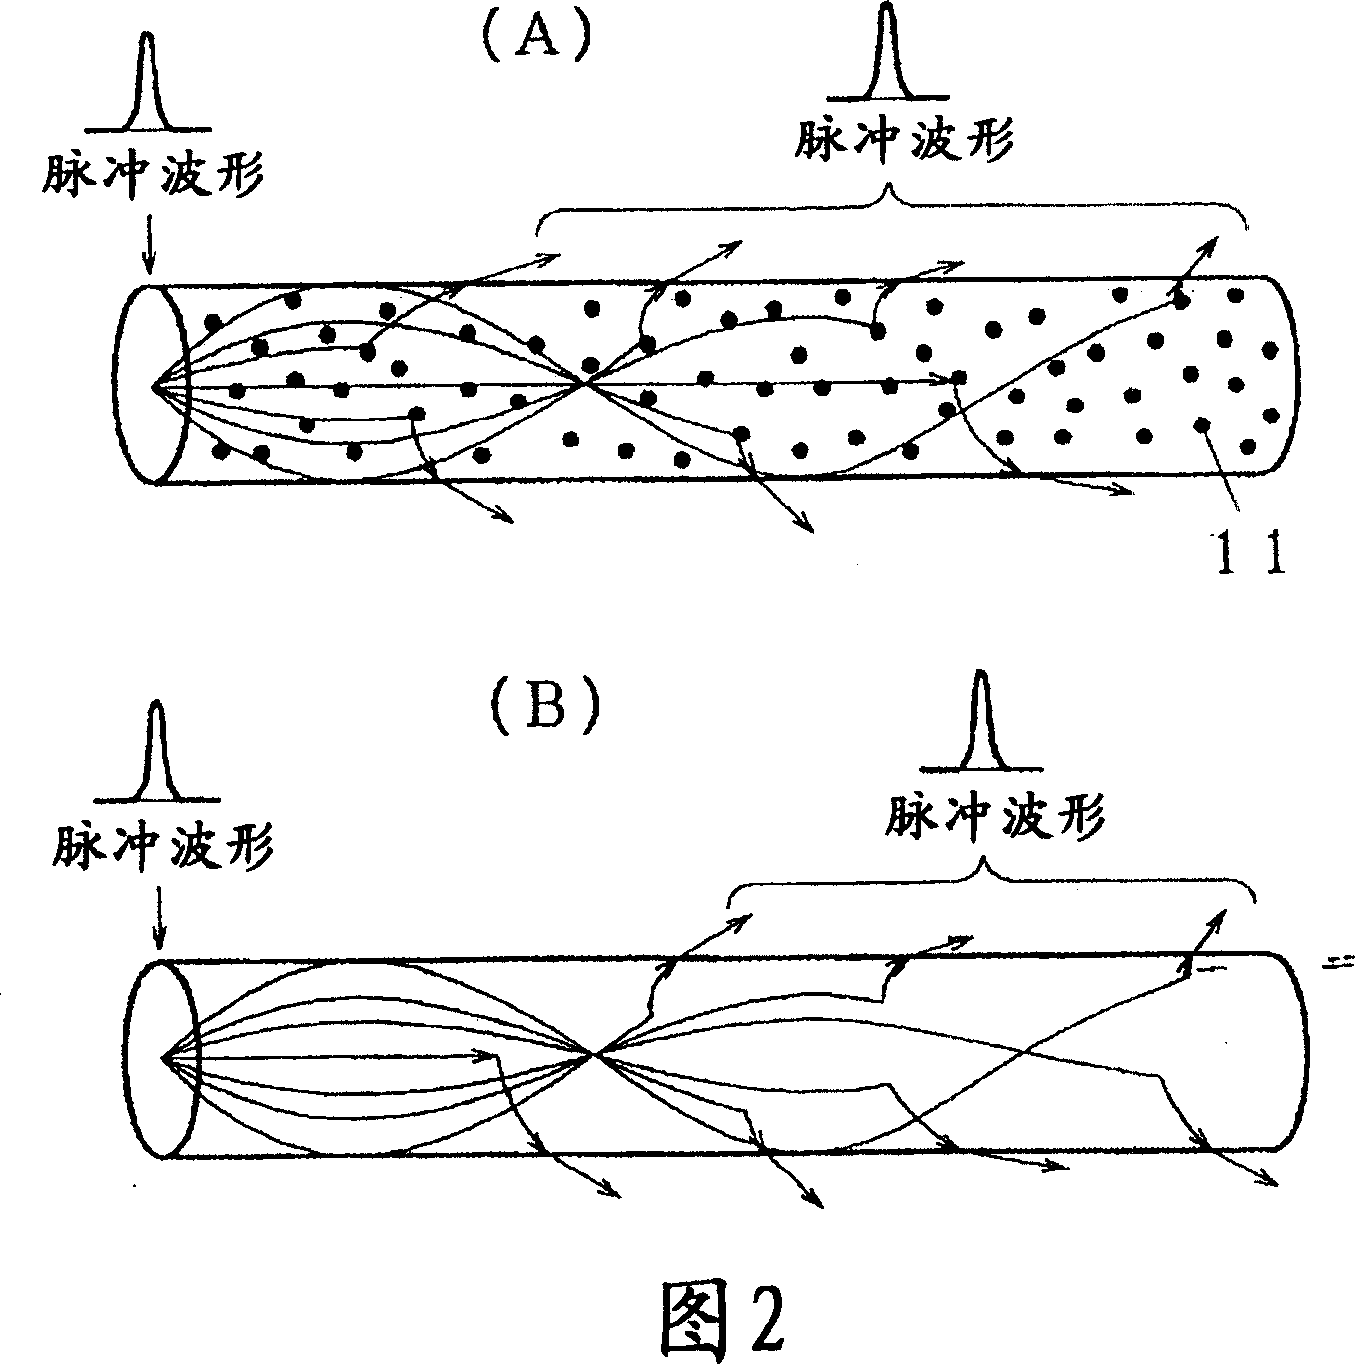 Communications system and leakage optical fiber